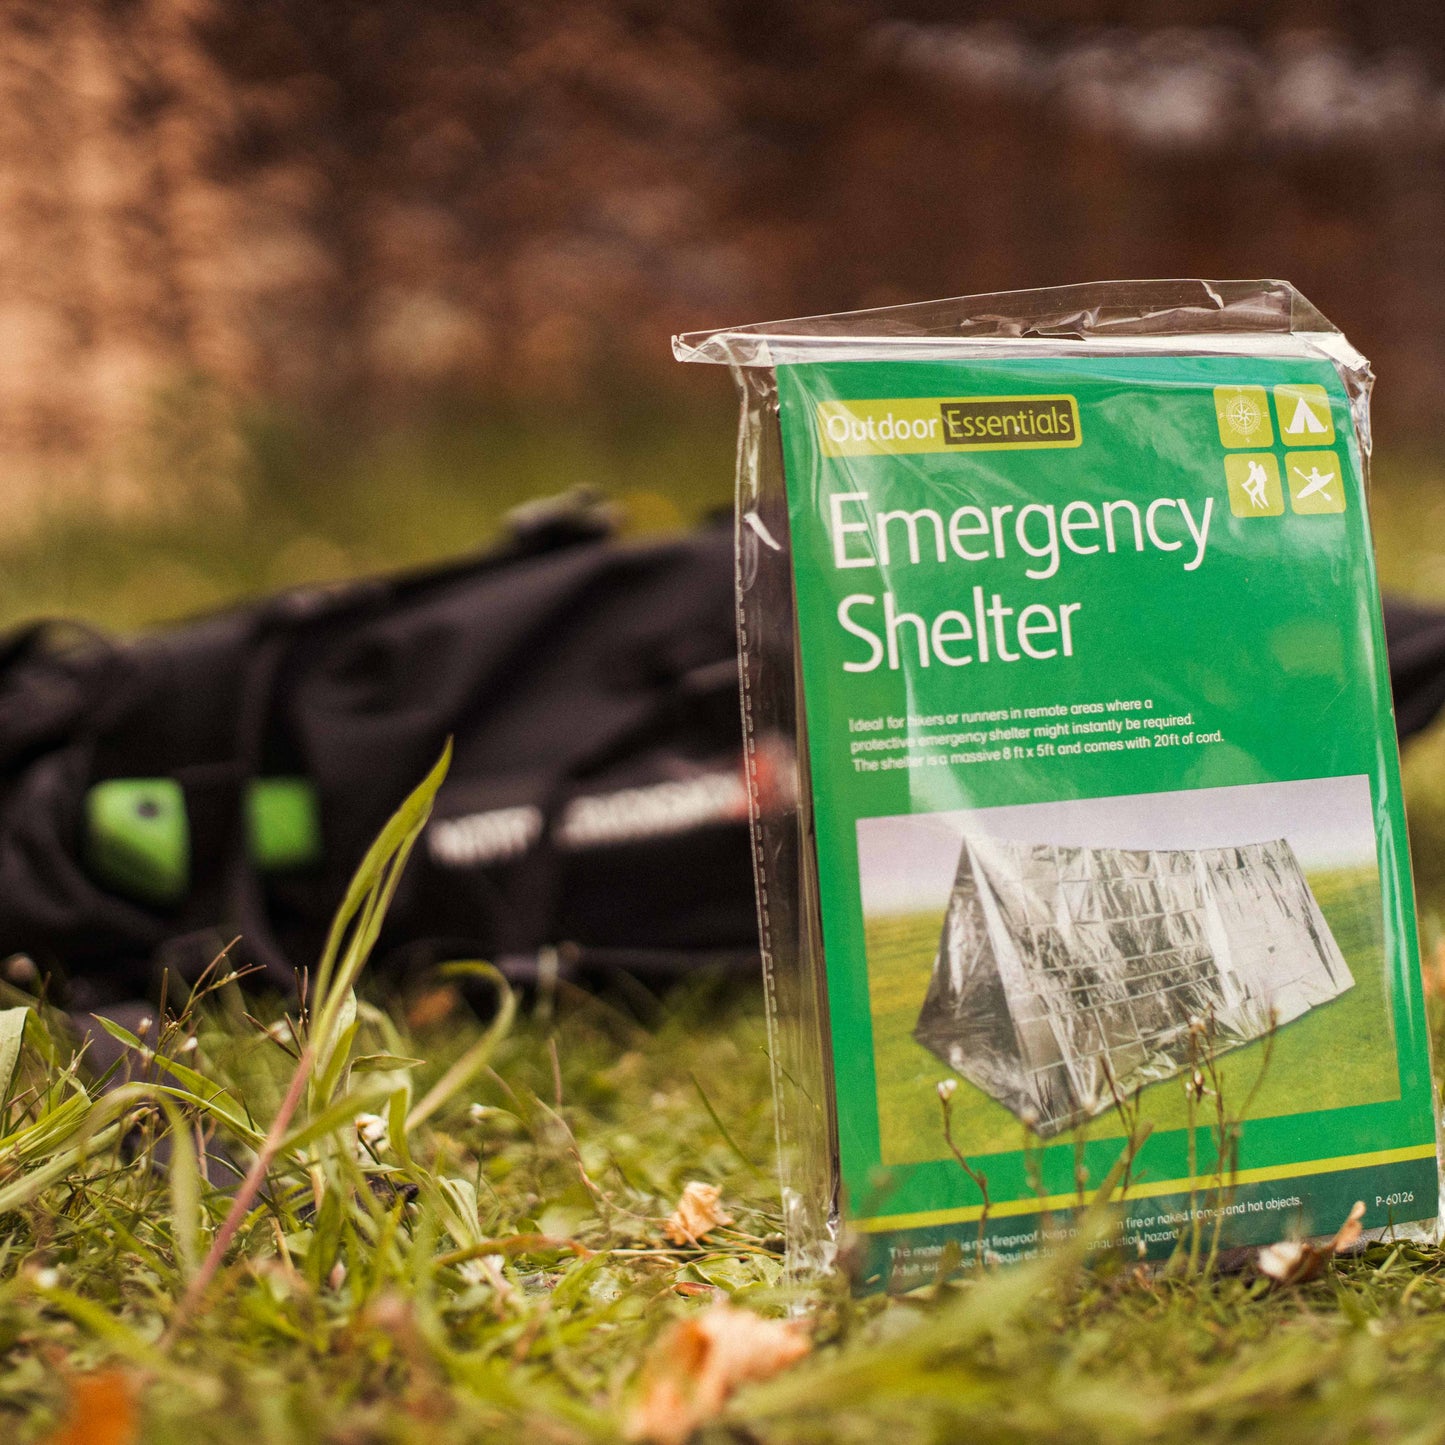 Emergency Tent - Shelter anywhere quickly